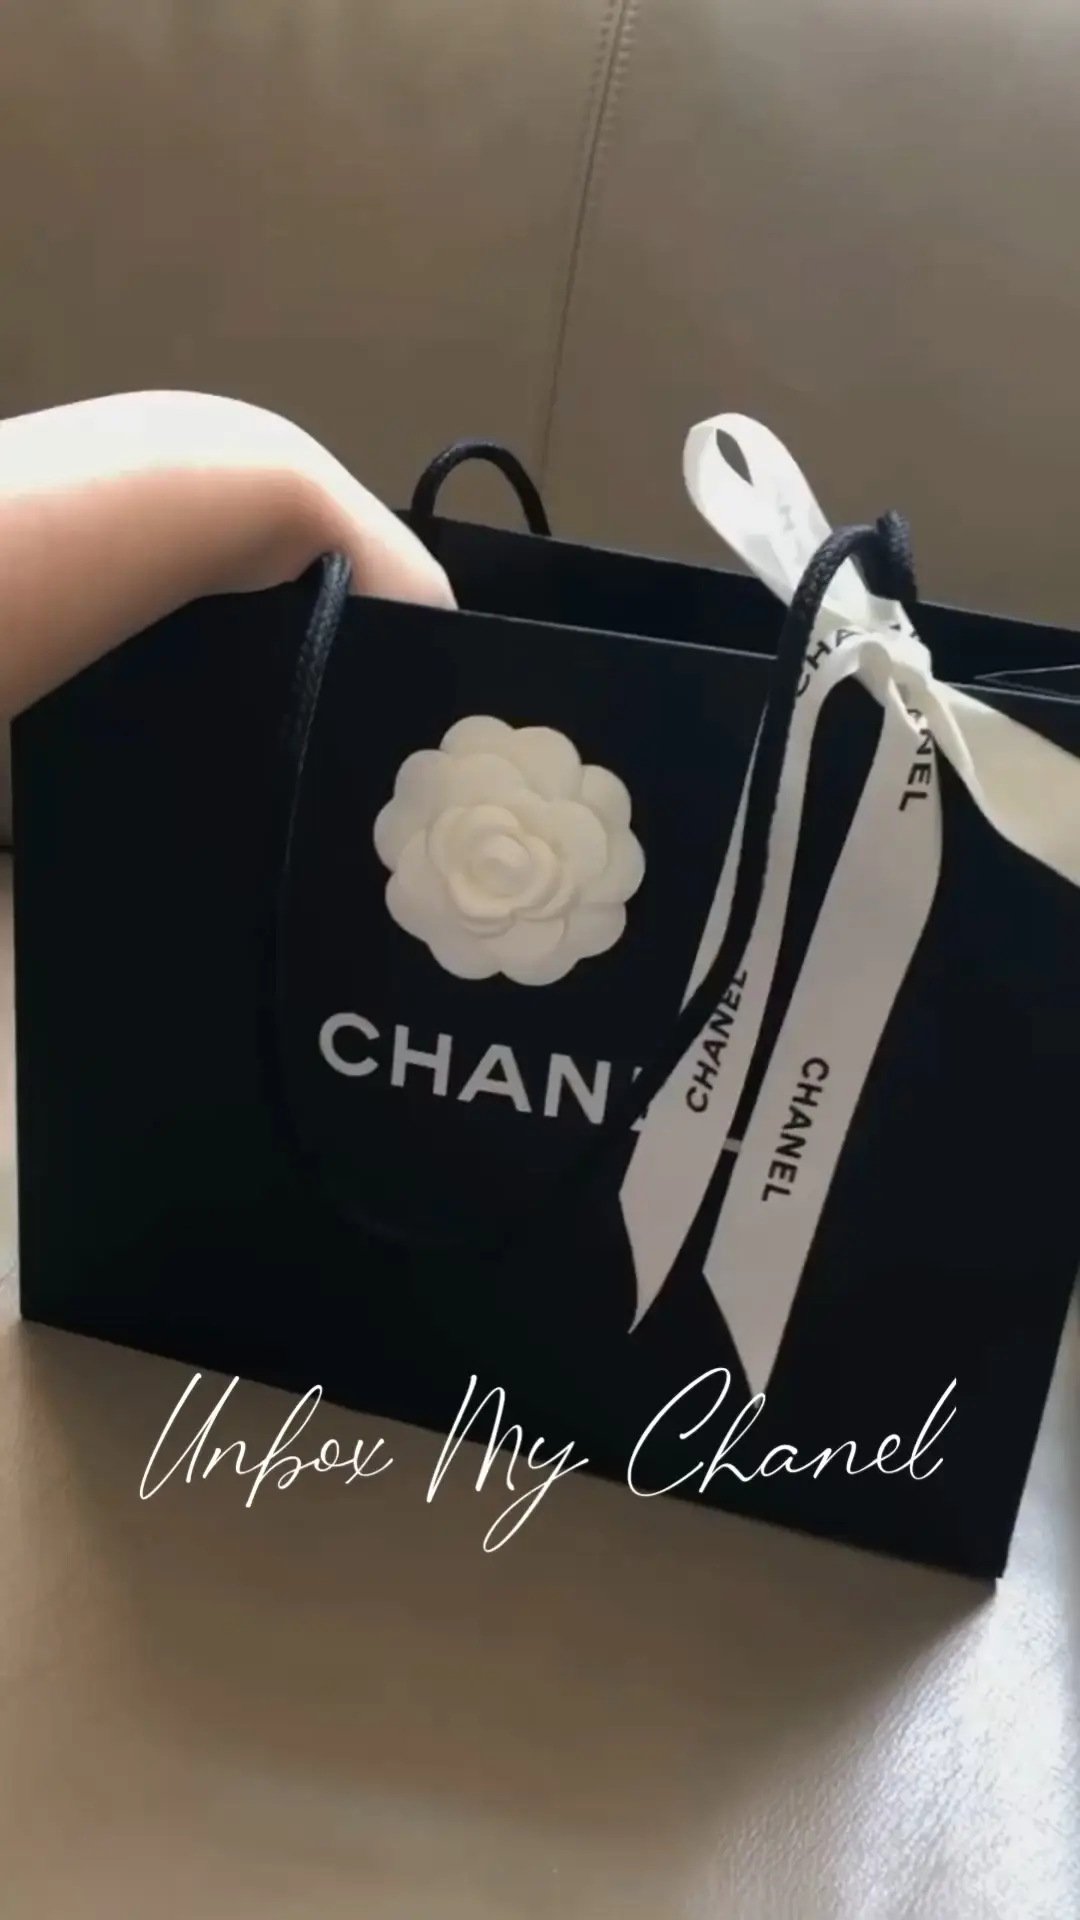 Unbox My Chanel Choker With Me  Video published by Cassandra Ng